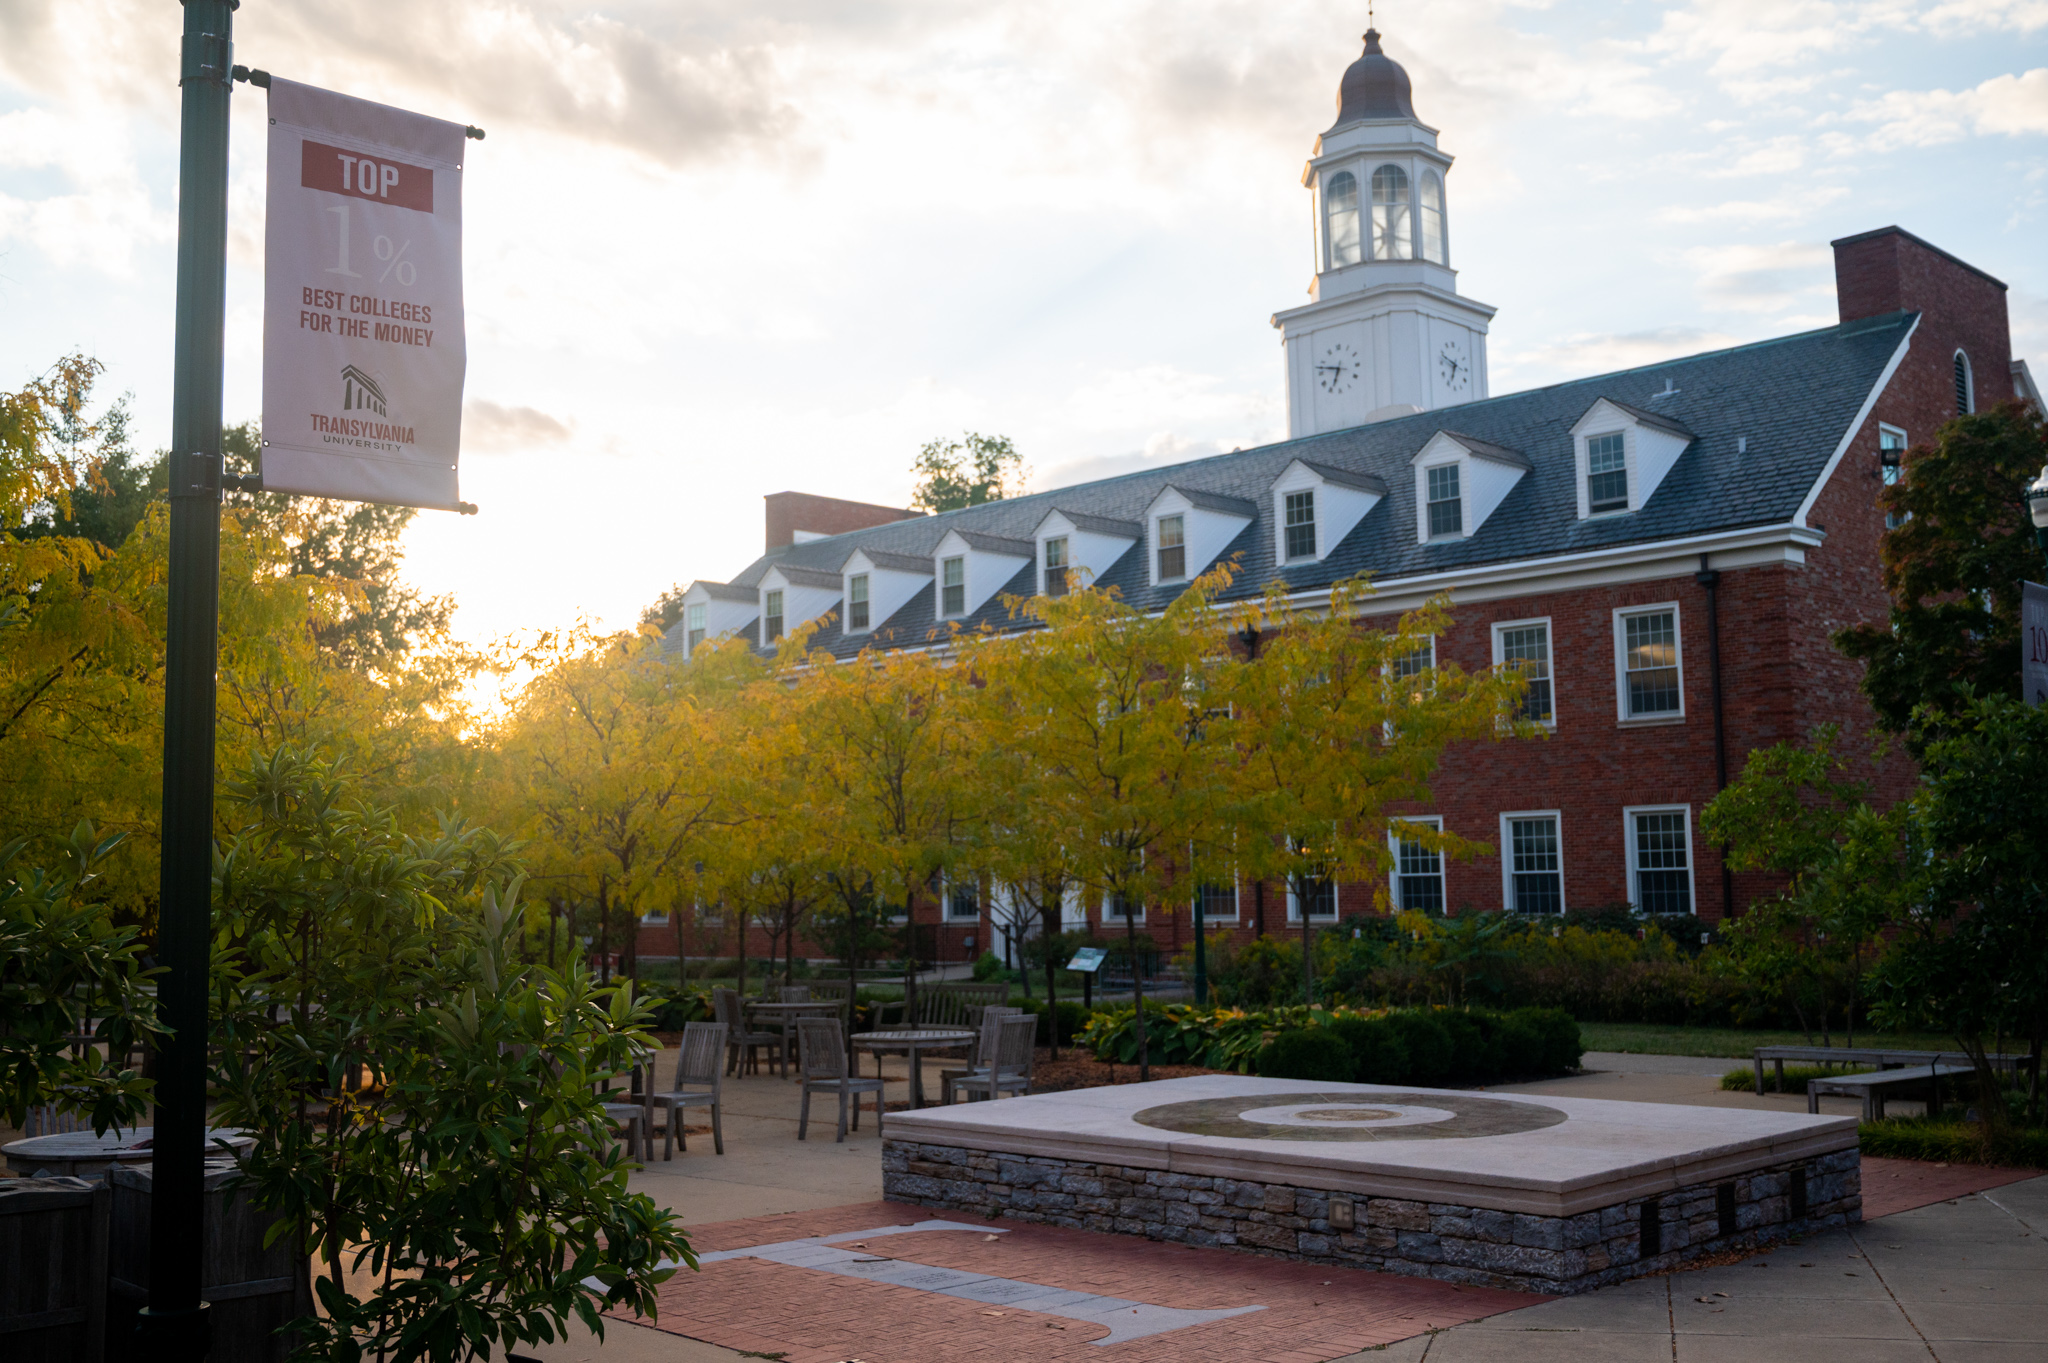 Destination Transy October event brings prospective students to campus